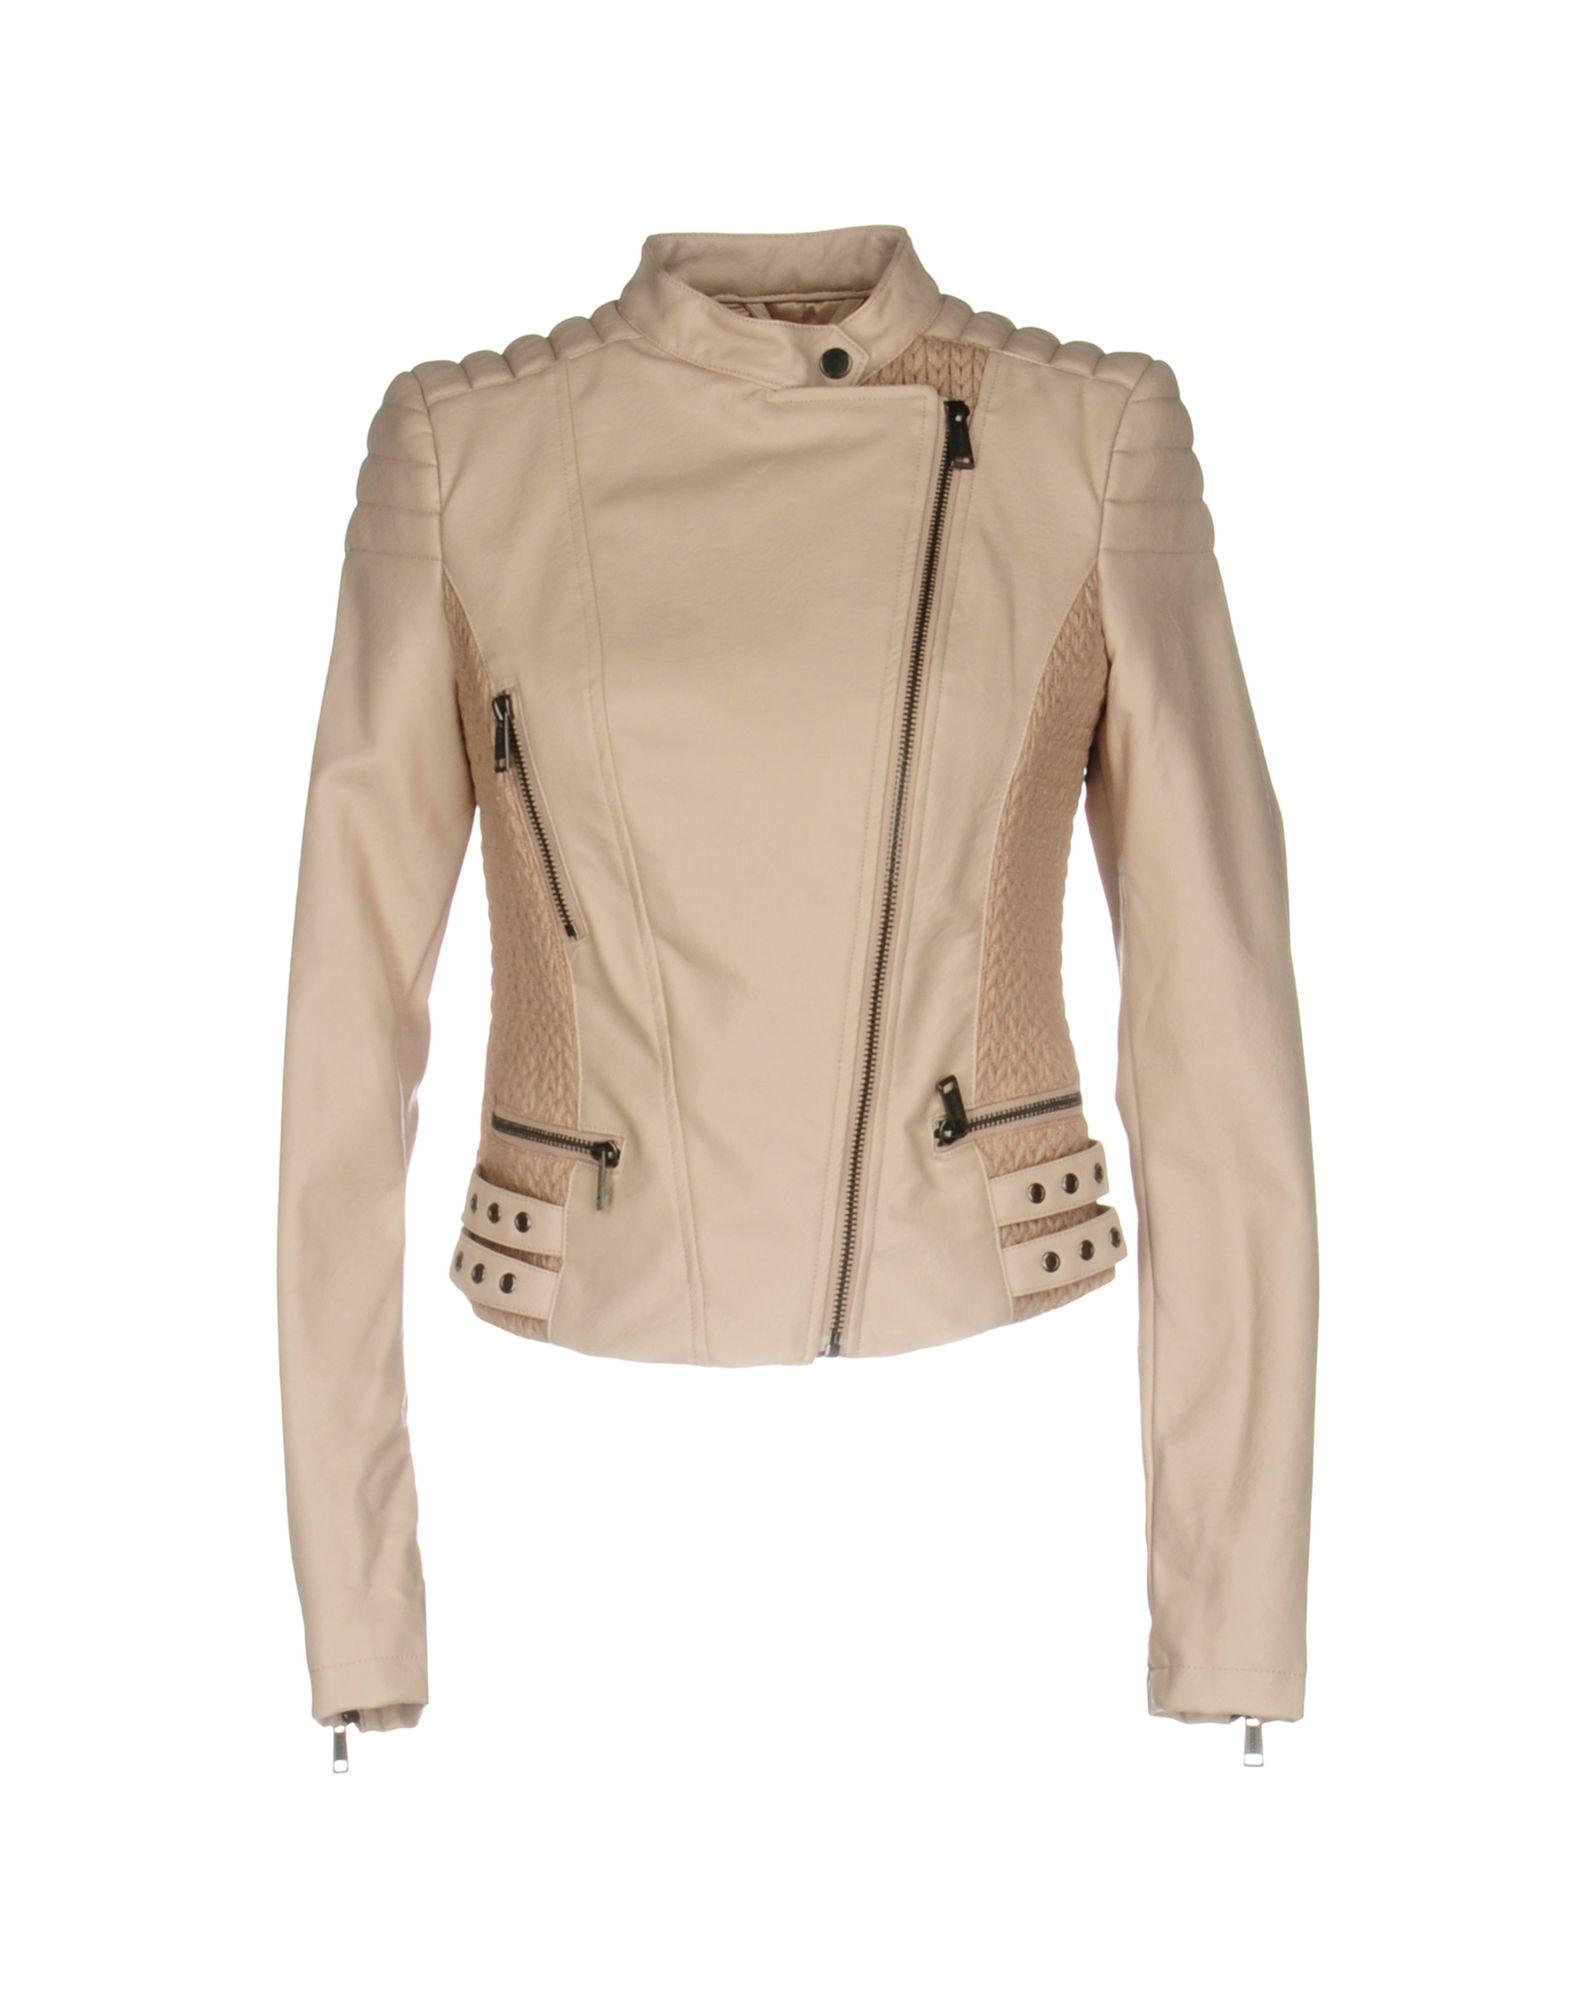 Lyst - Guess Jacket in Pink